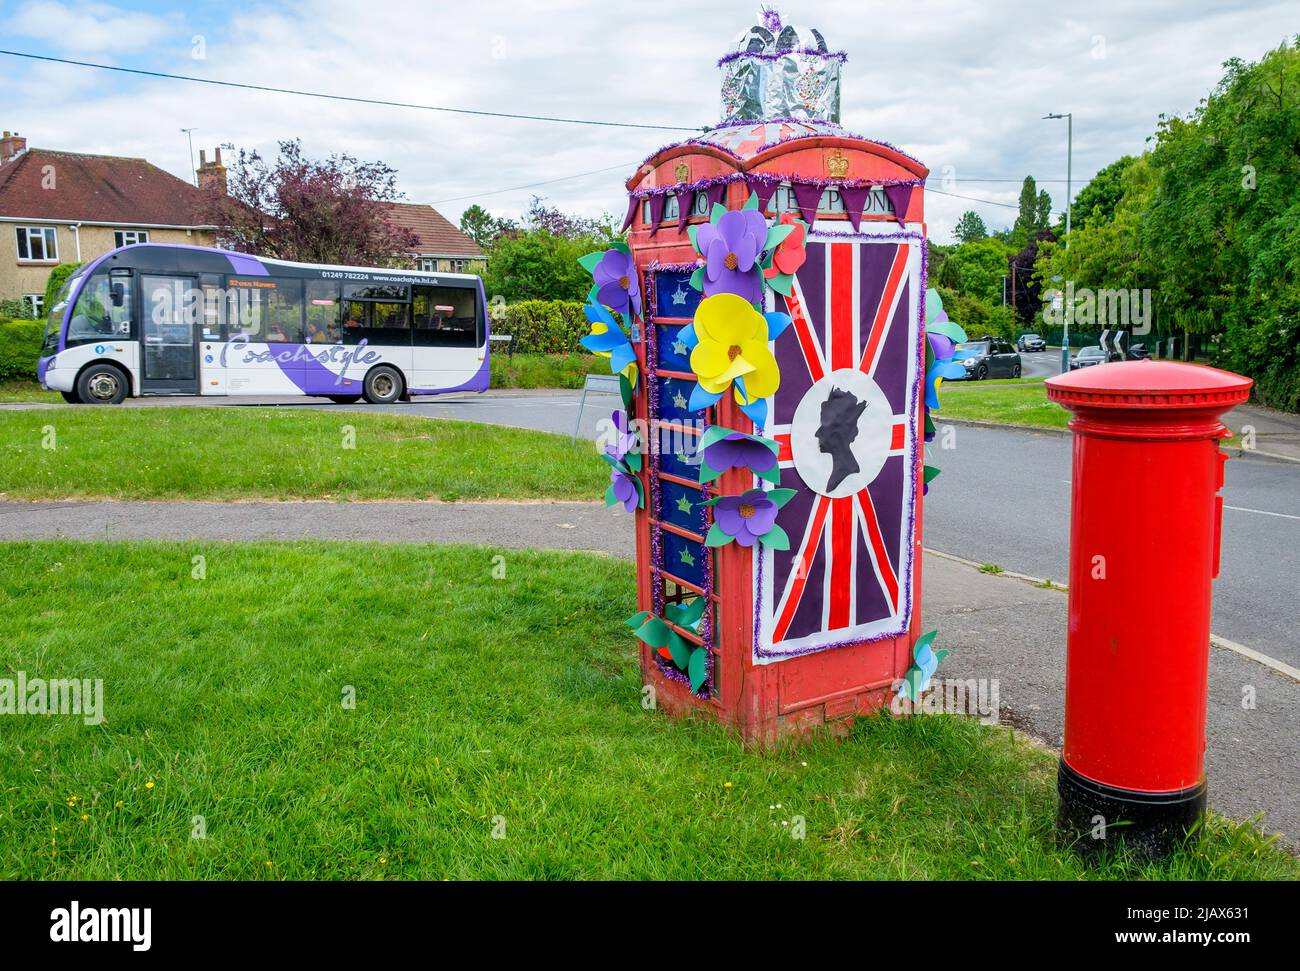 Chippenham, Wiltshire, UK. 1st June, 2022. A day before the long bank holiday weekend starts, a phone box that has been decorated to celebrate the Queen's Platinum Jubilee is pictured in Chippenham, Wiltshire. Credit: Lynchpics/Alamy Live News Stock Photo